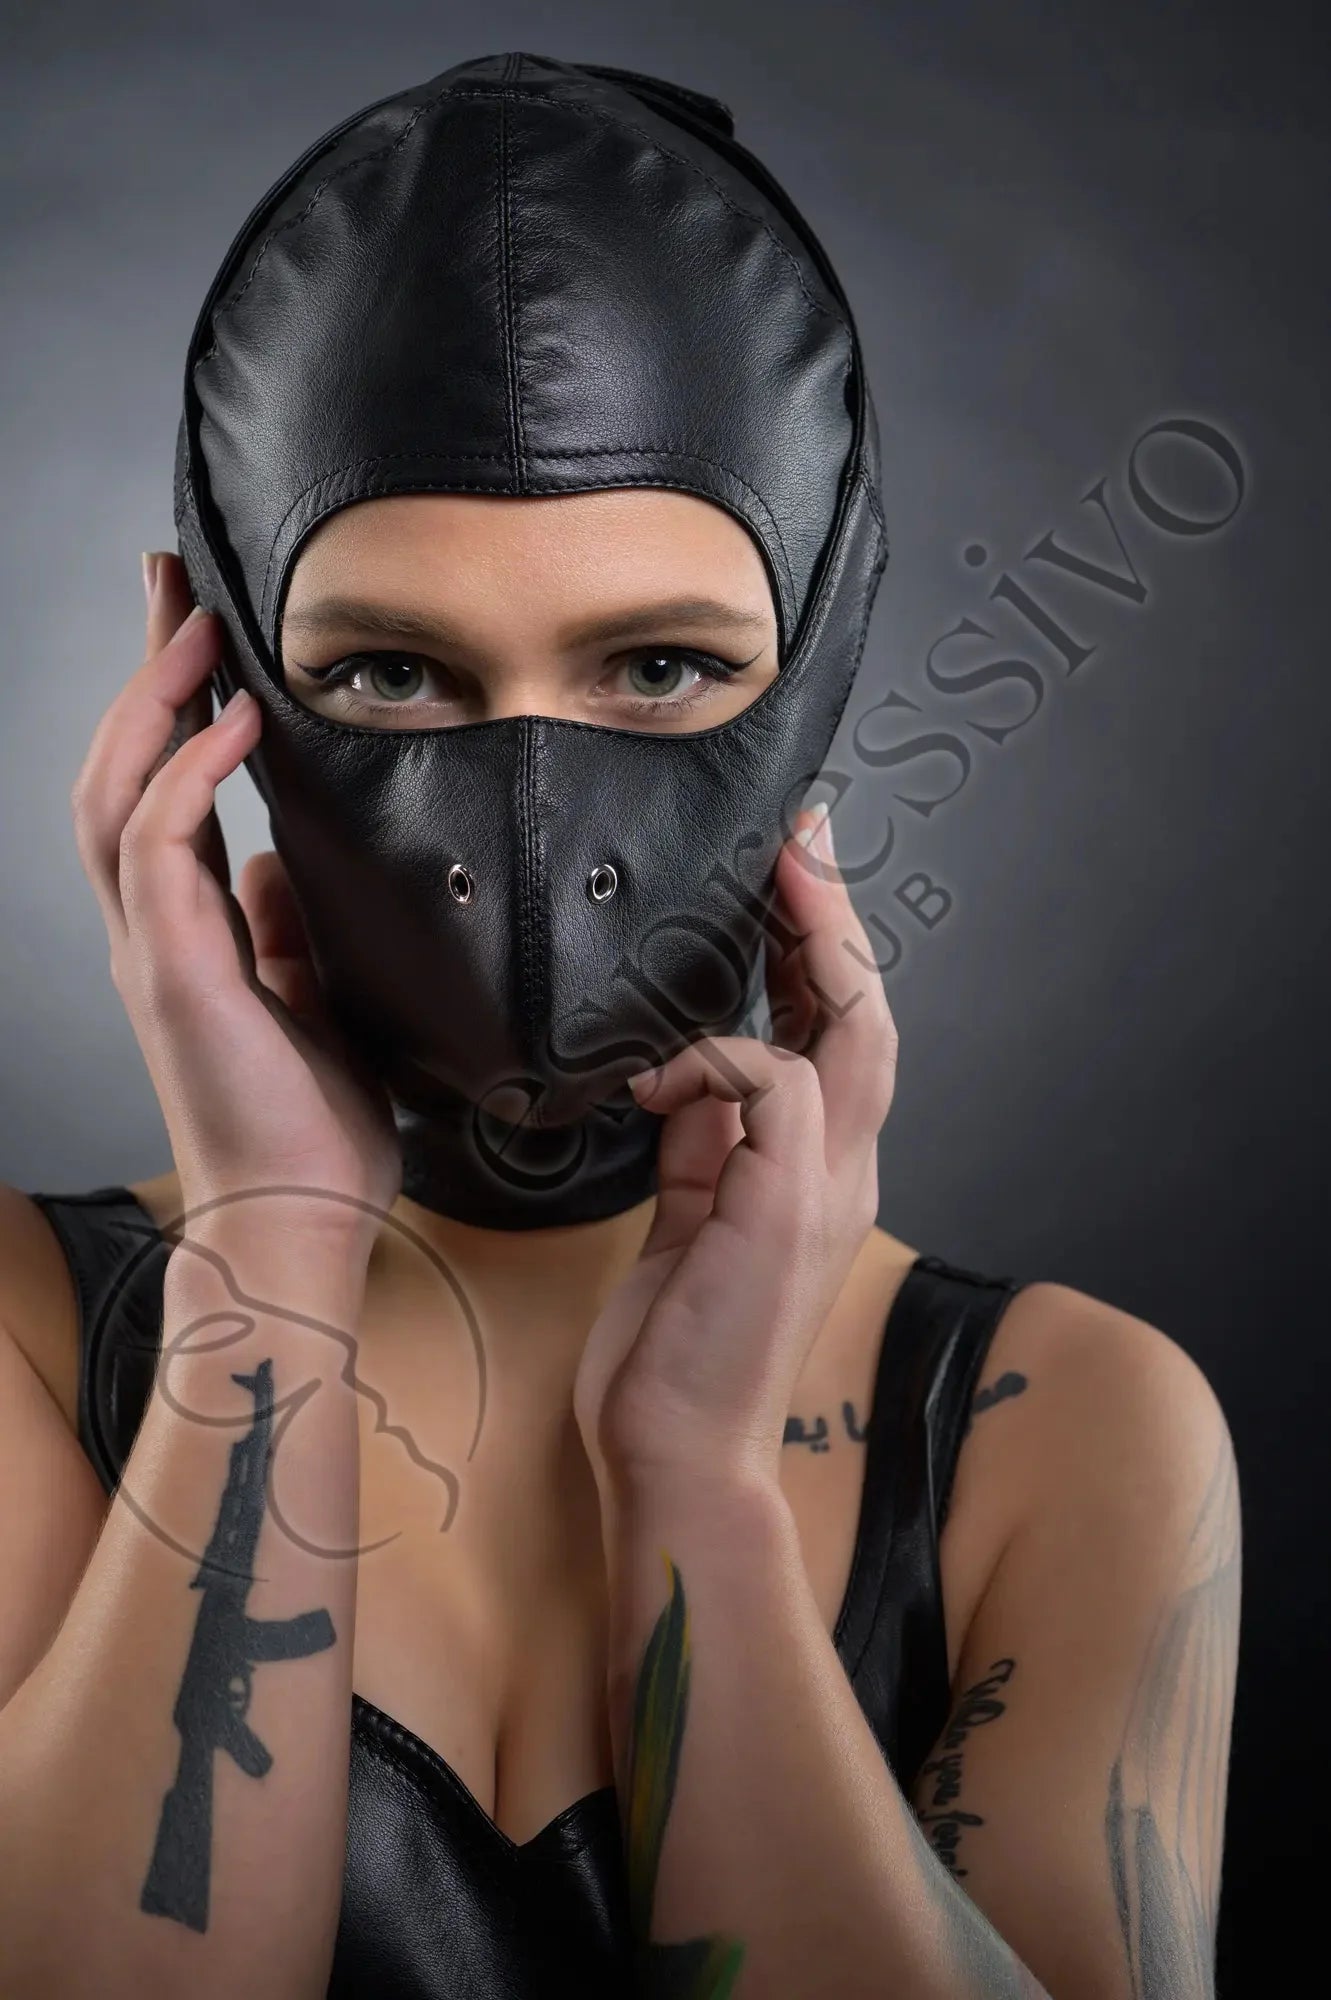 Real Leather BDSM Restraints - hood and leather lined face mask